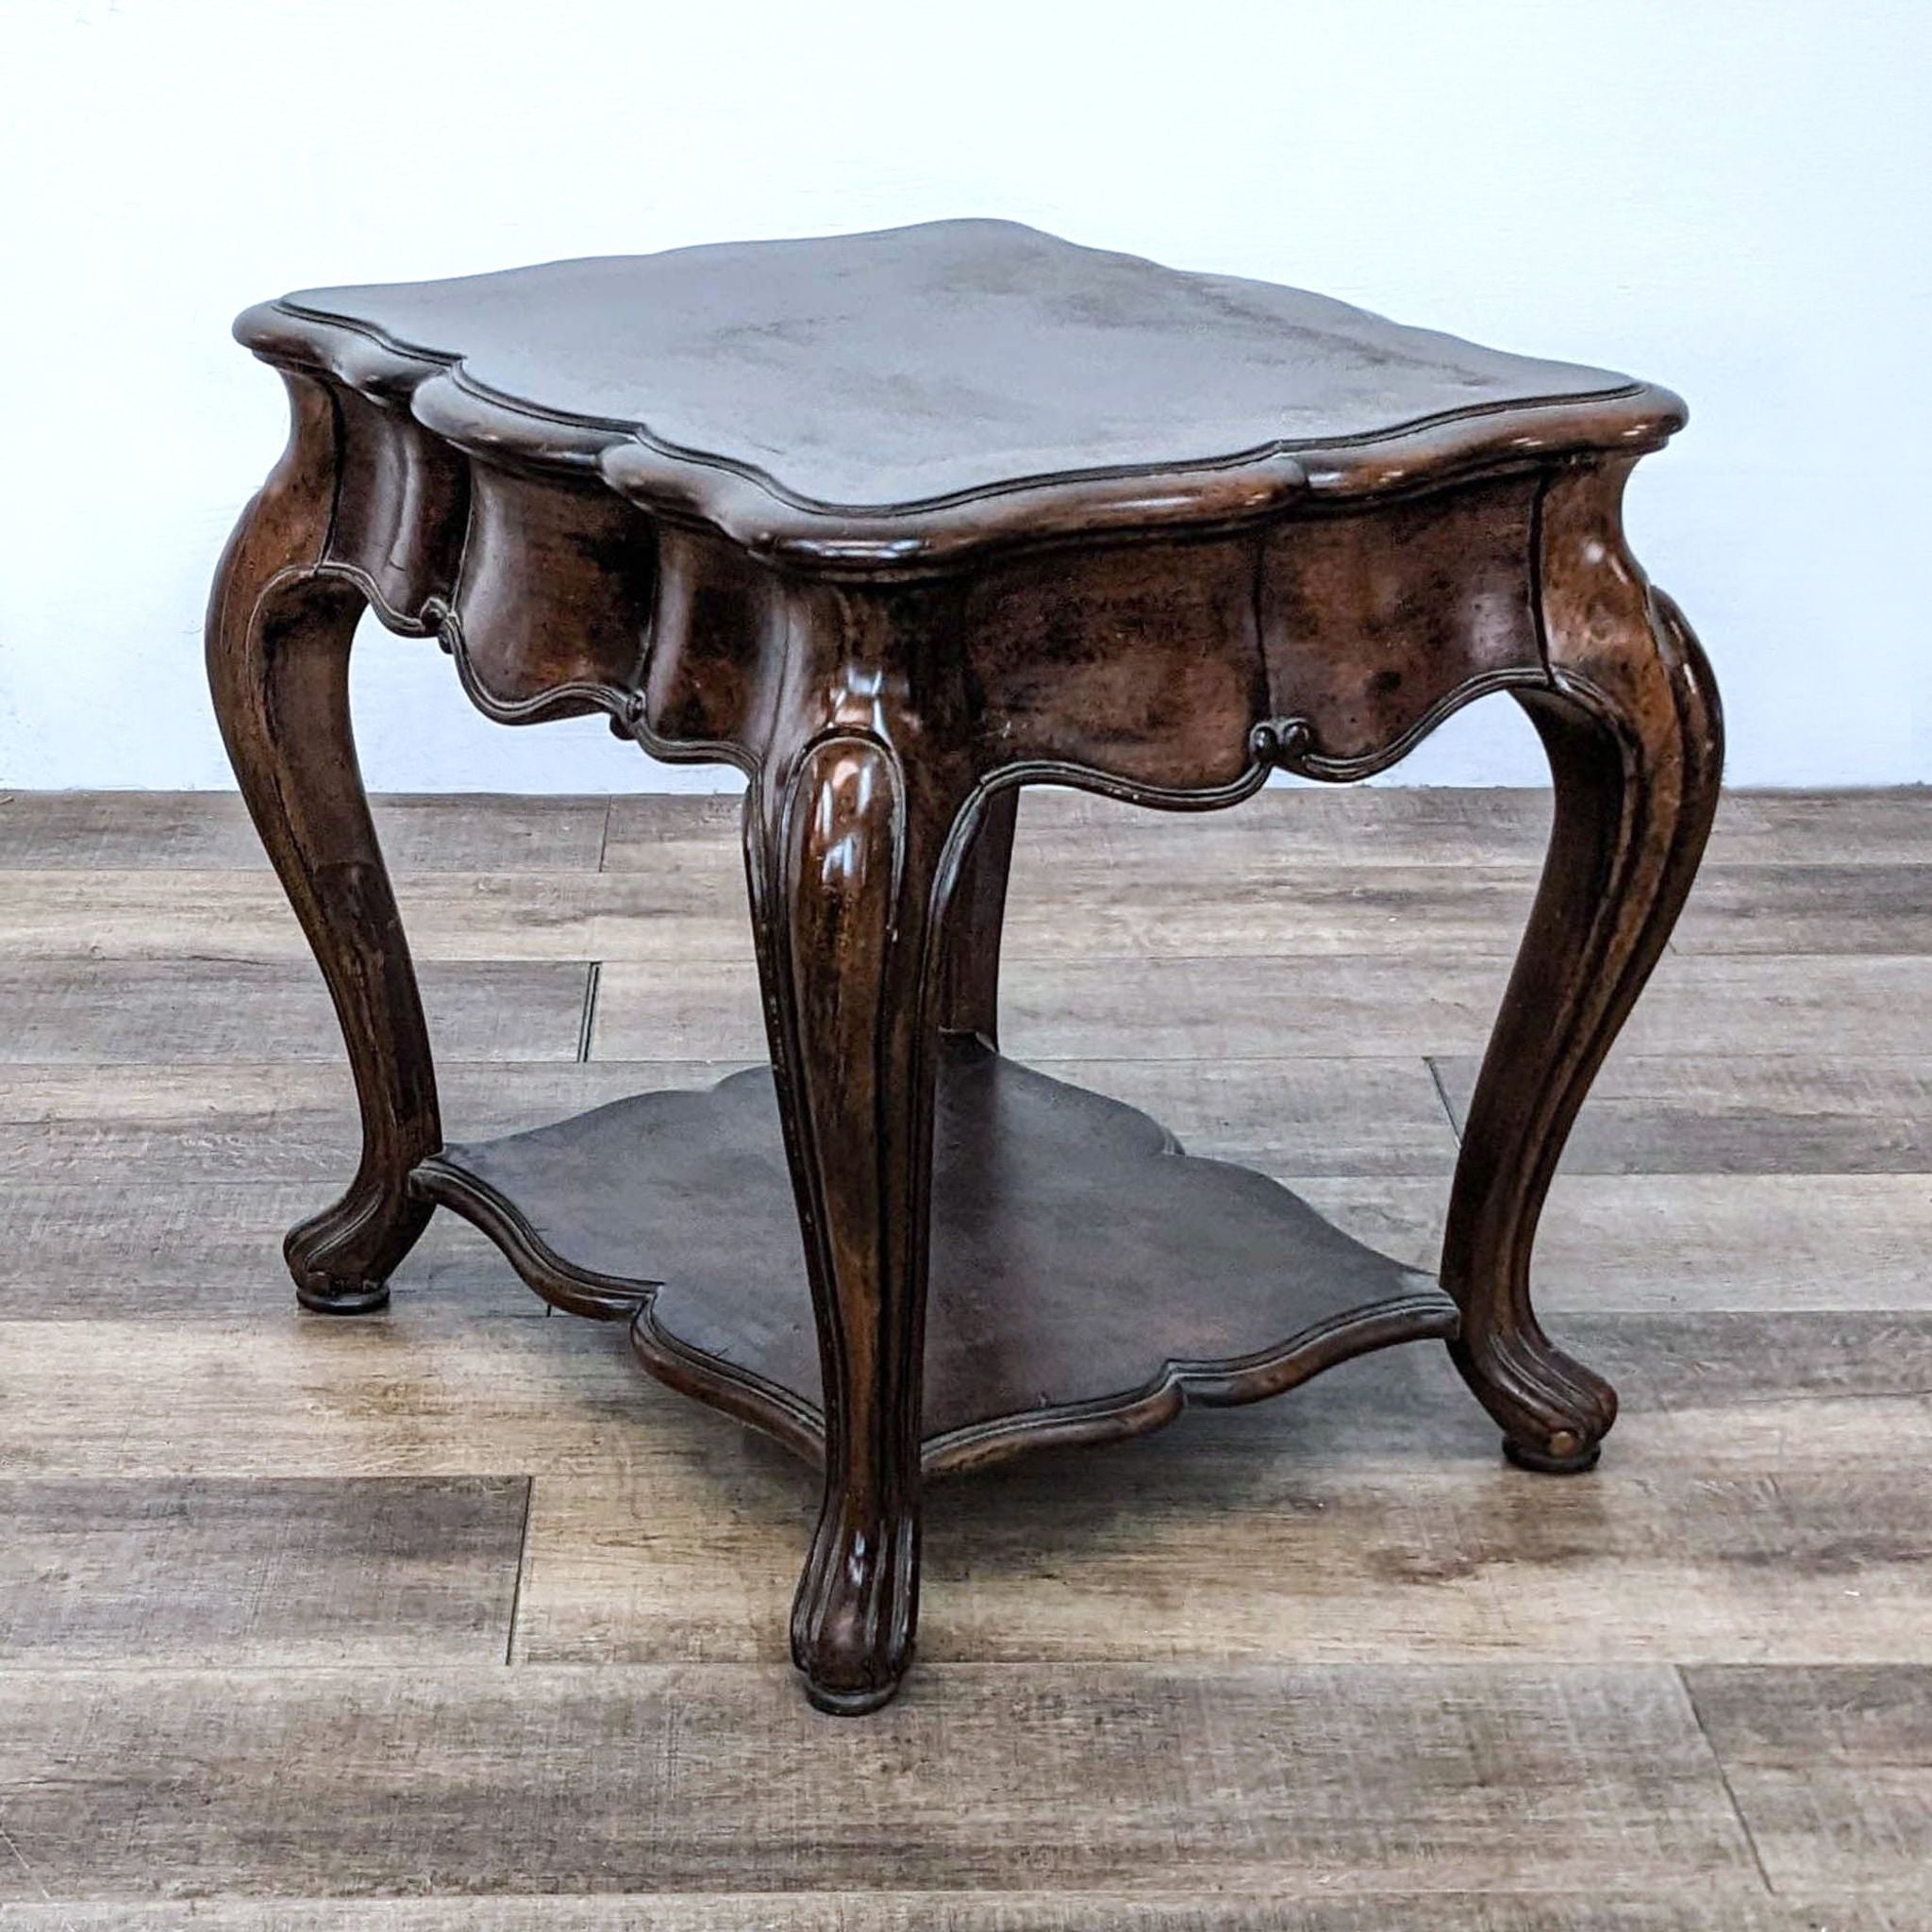 Alt text 2: Image of a wooden Thomasville branded end table with a scalloped surface, elegant legs, and a shelf below.